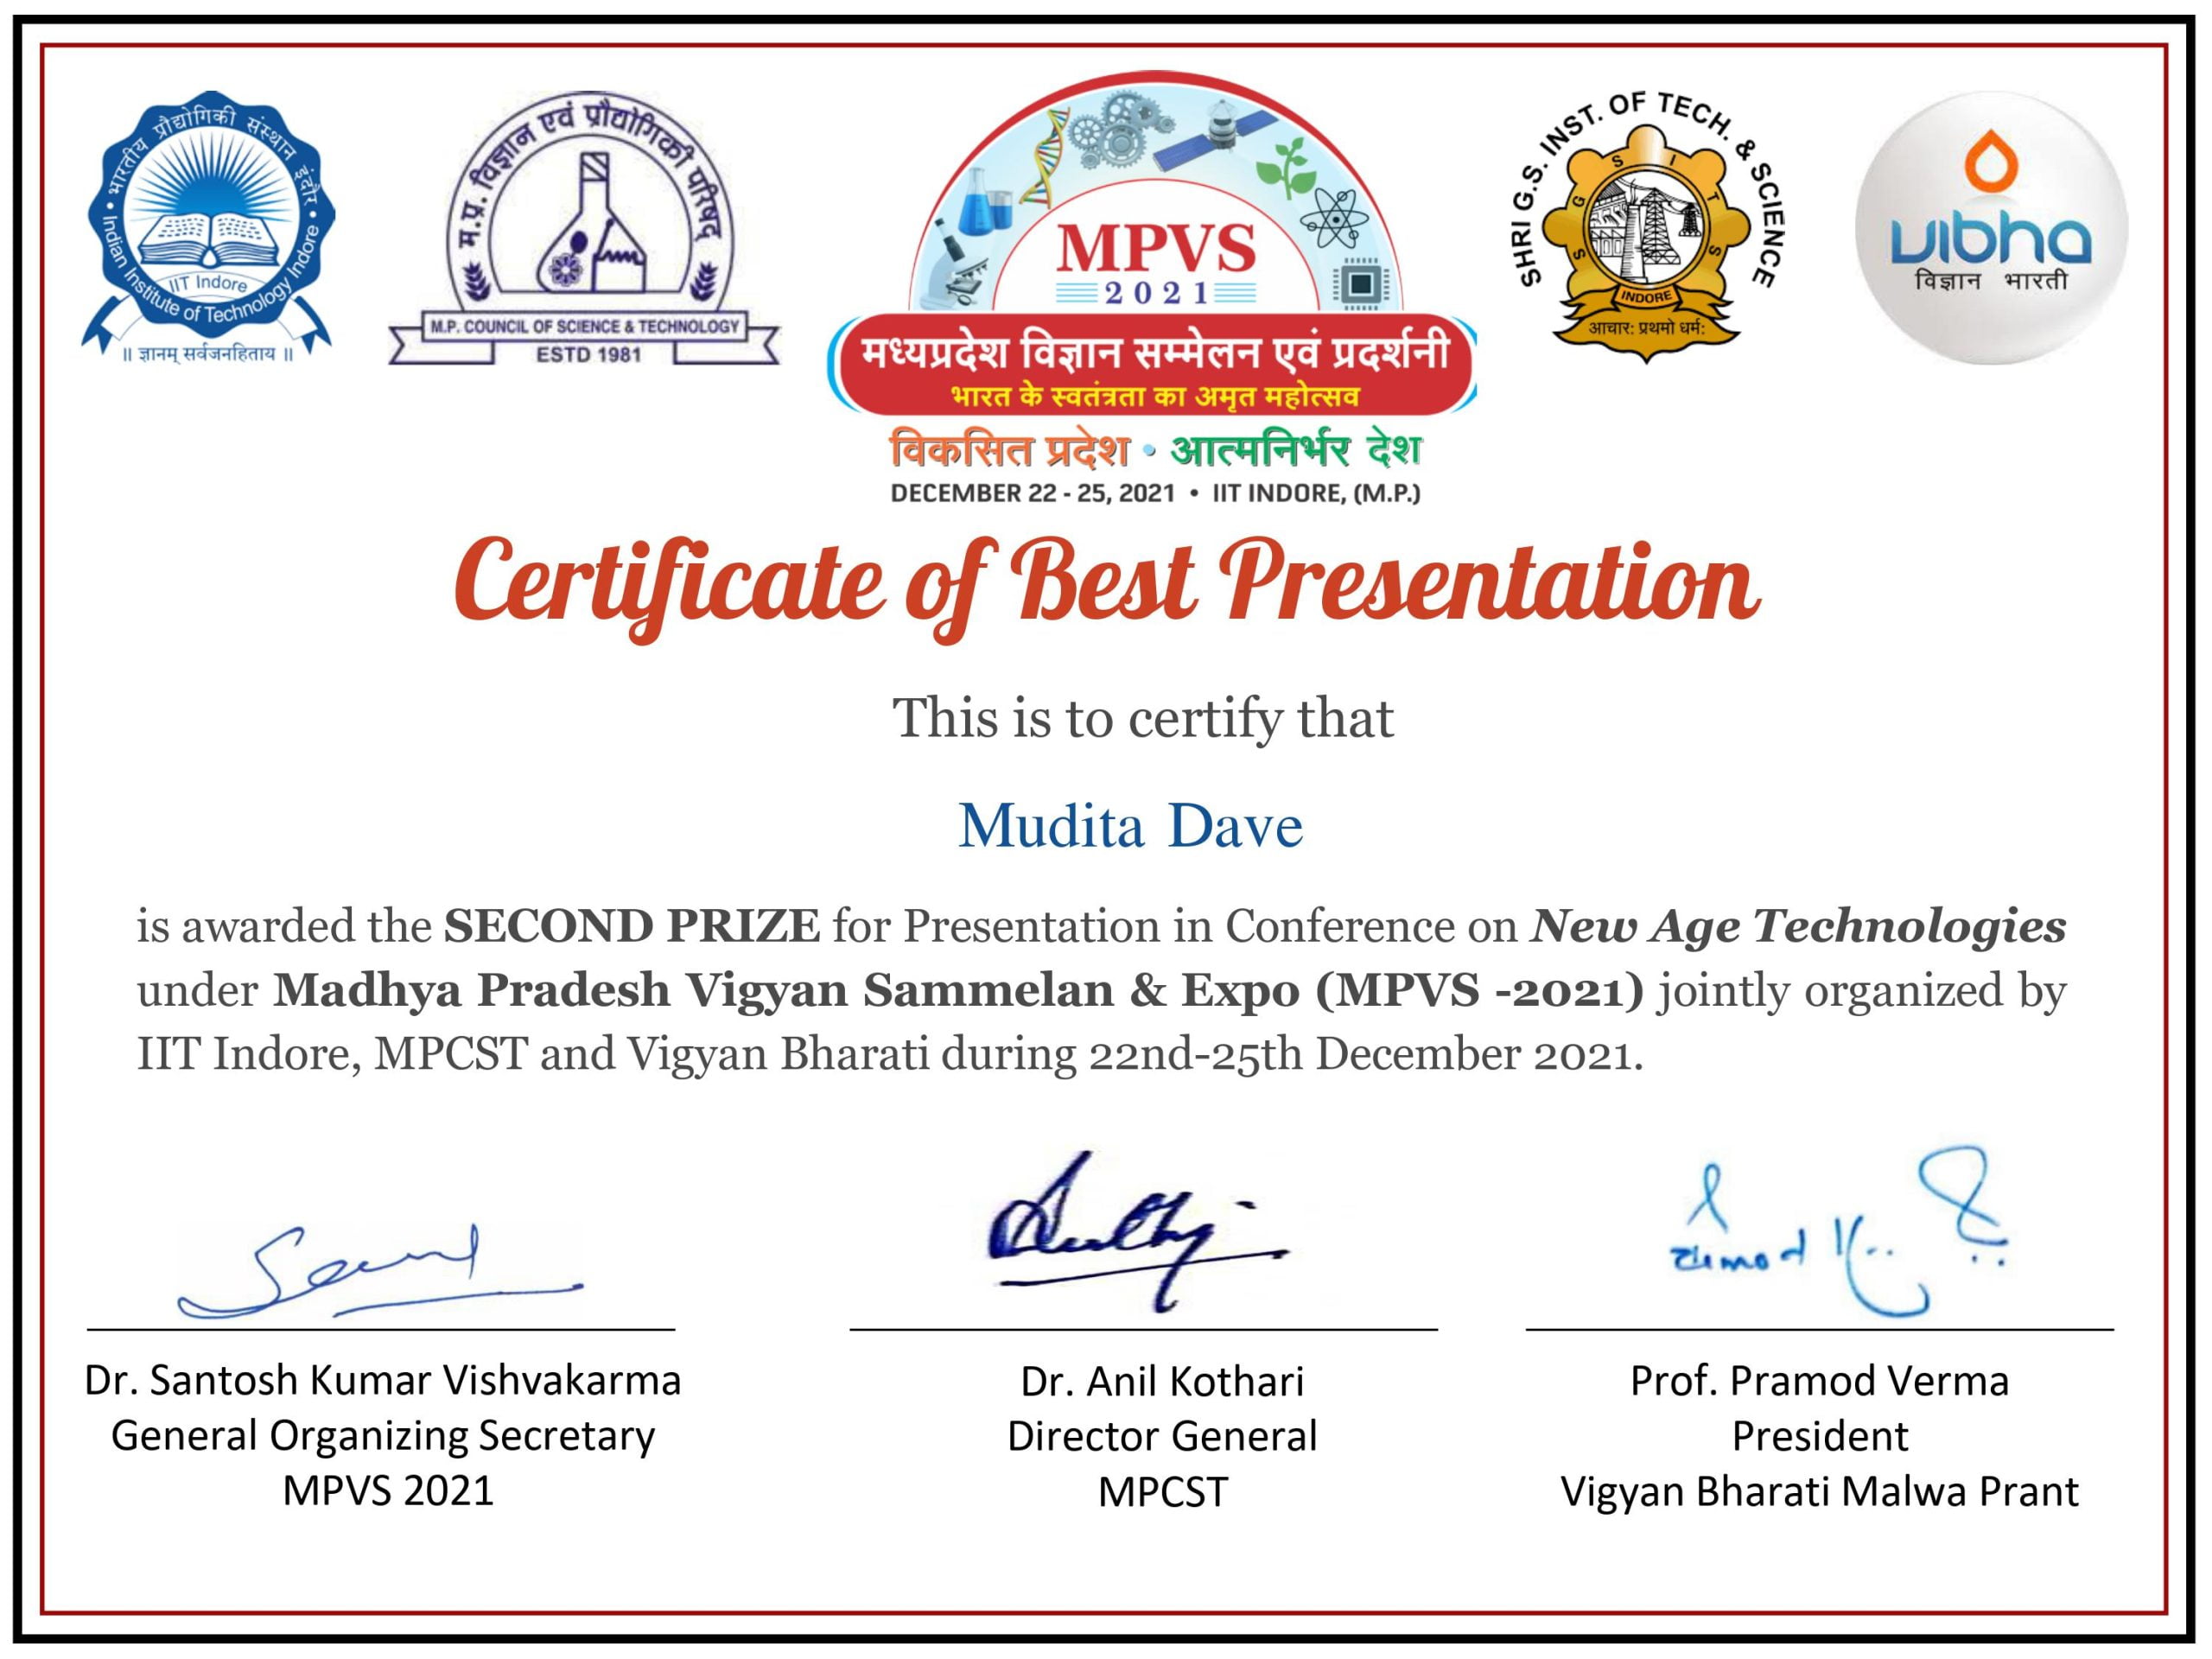 Second Position in MPVS 2021 Conference